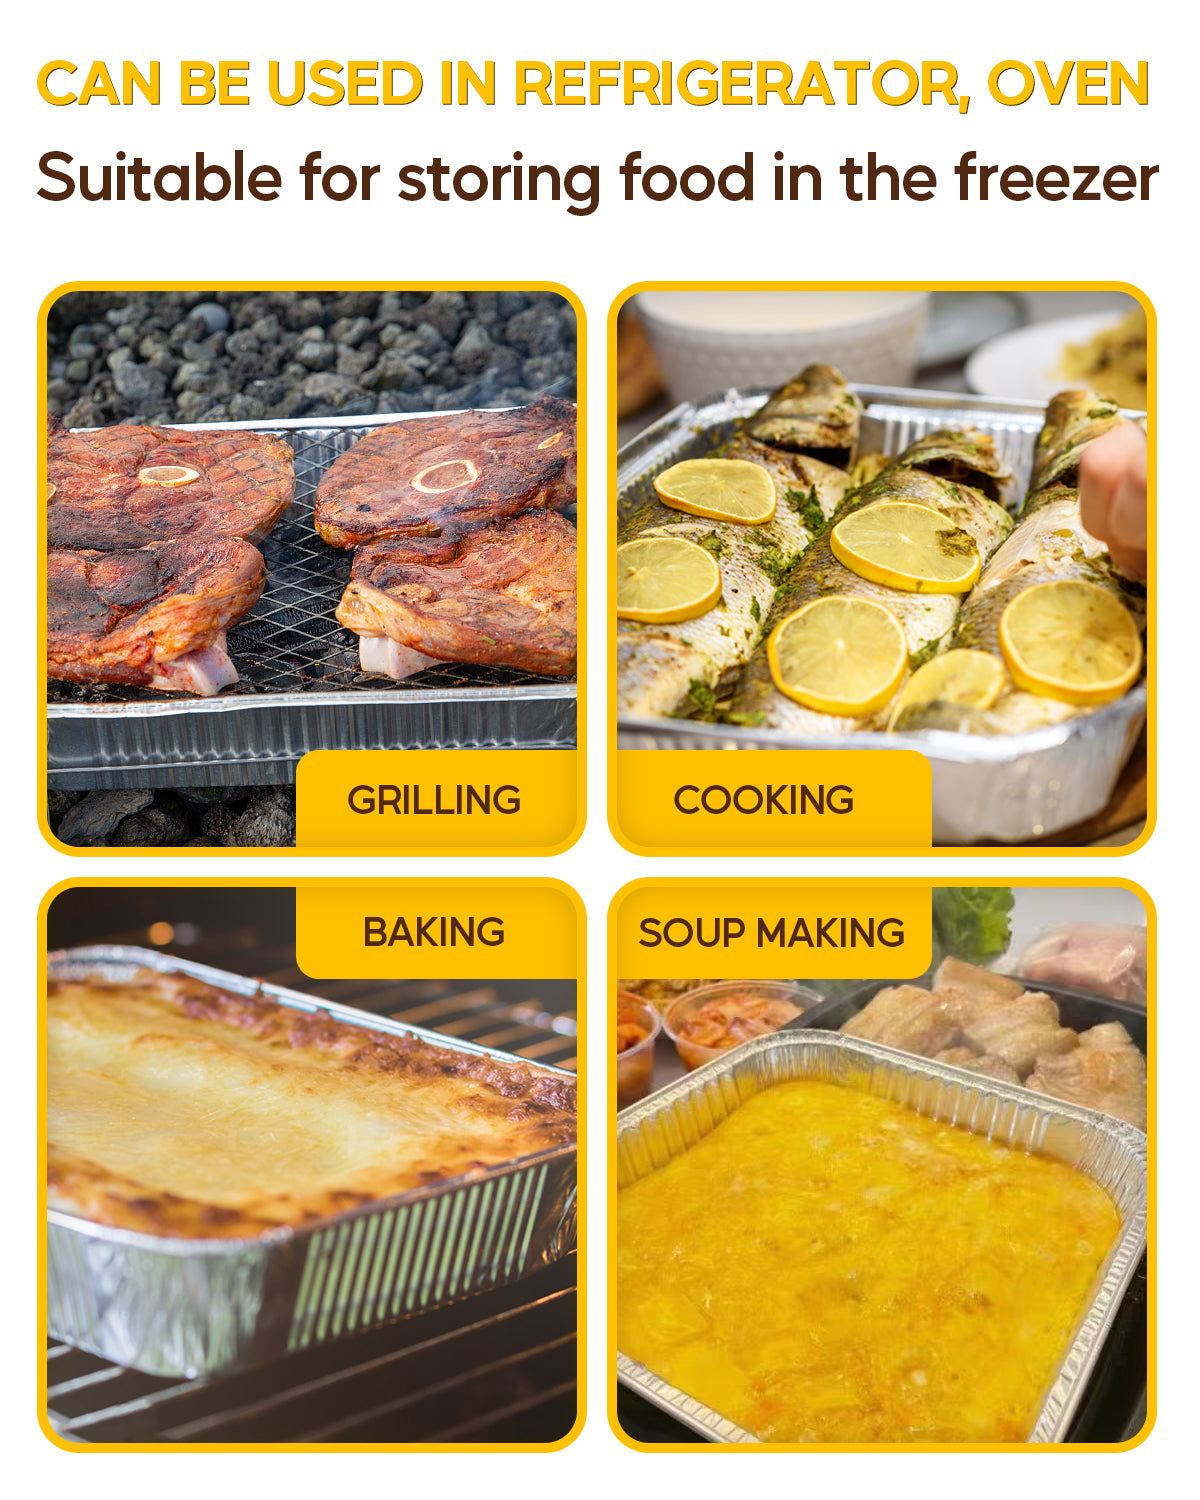 Disposable Aluminum Foil 9x9 Square Baking Pans (30 Count) by Stock Your  Home